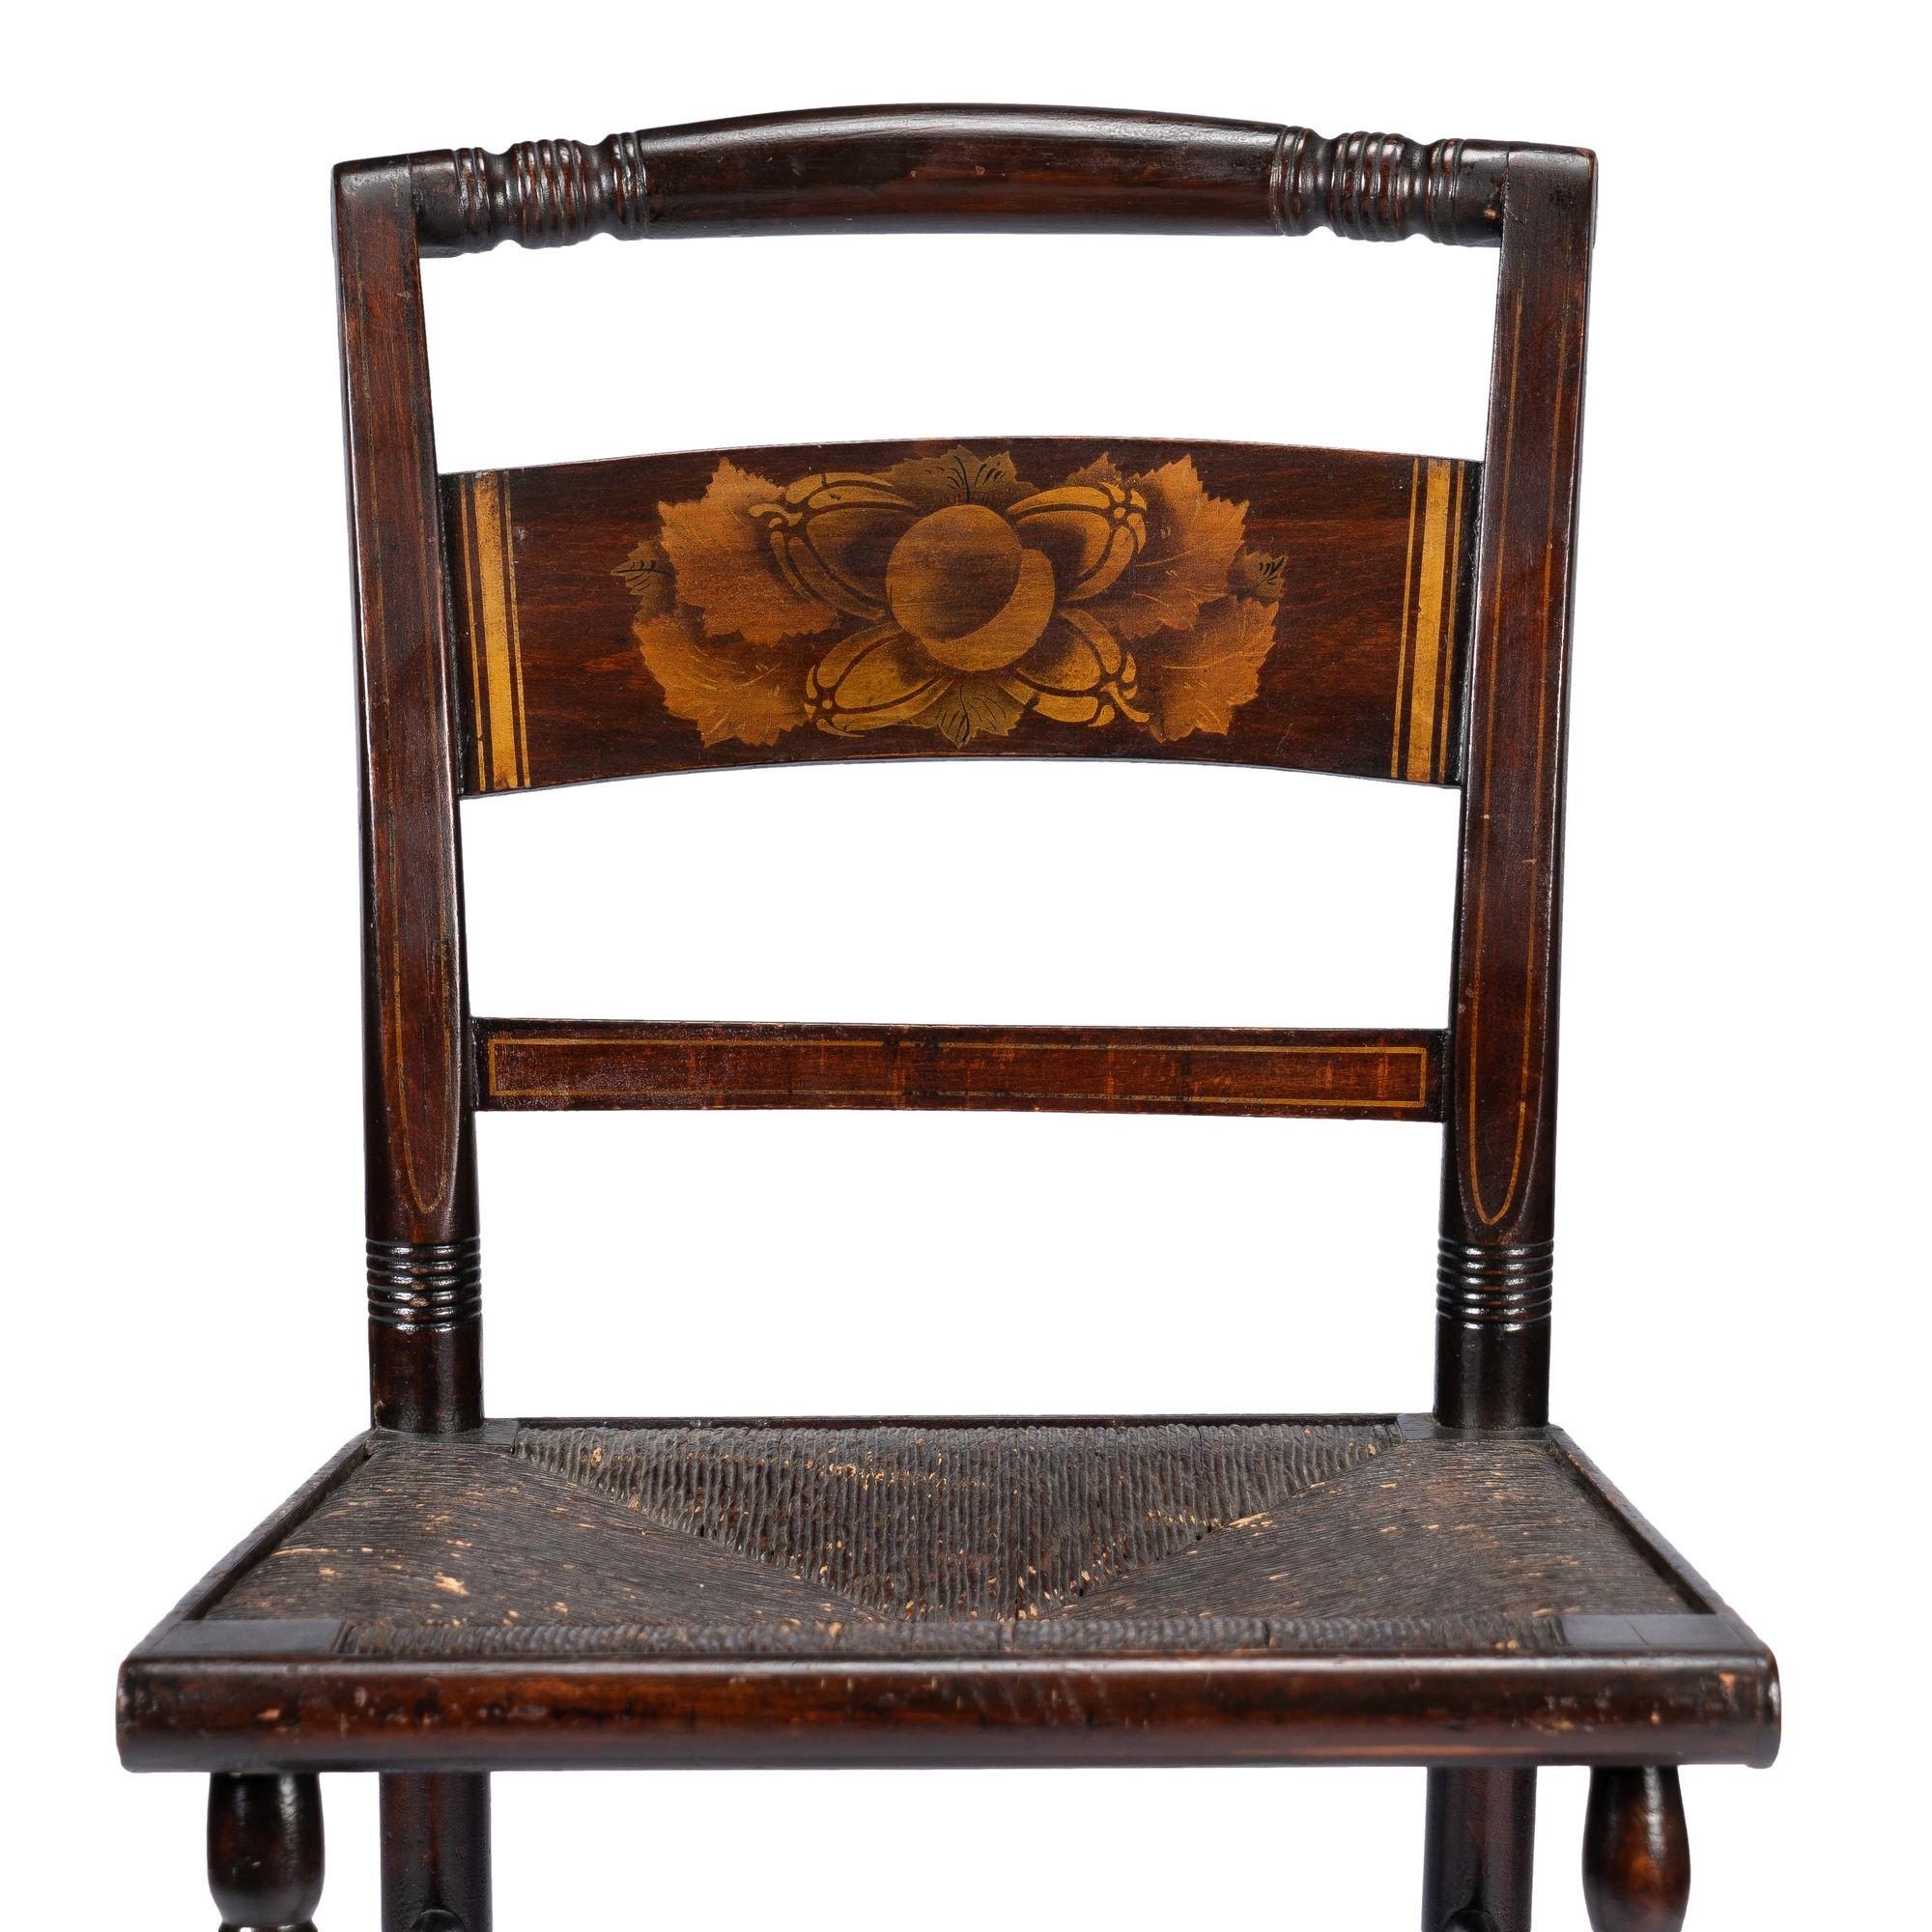 Connecticut Valley Hitchcock rush seat side chair, 1820 3